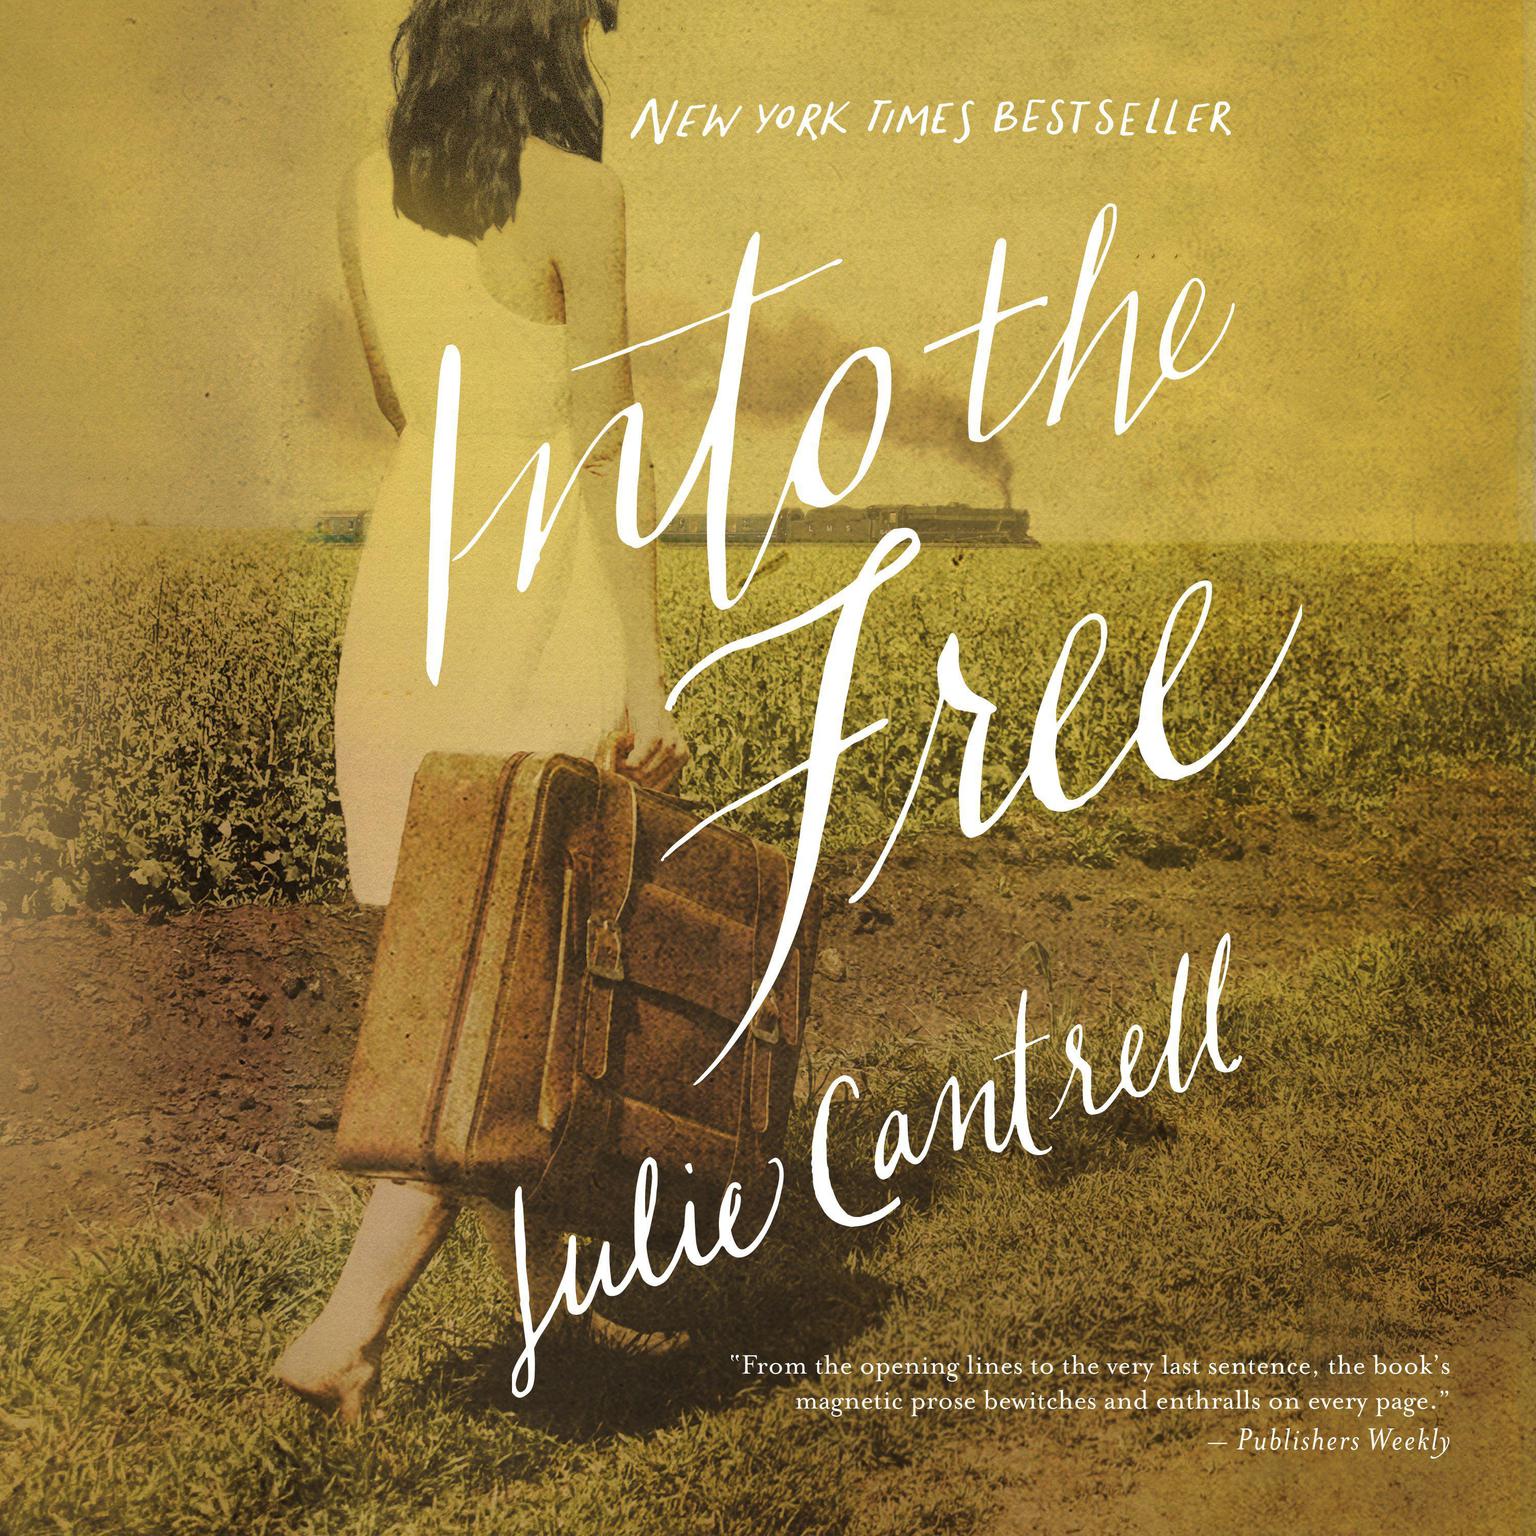 Into the Free Audiobook, by Julie Cantrell